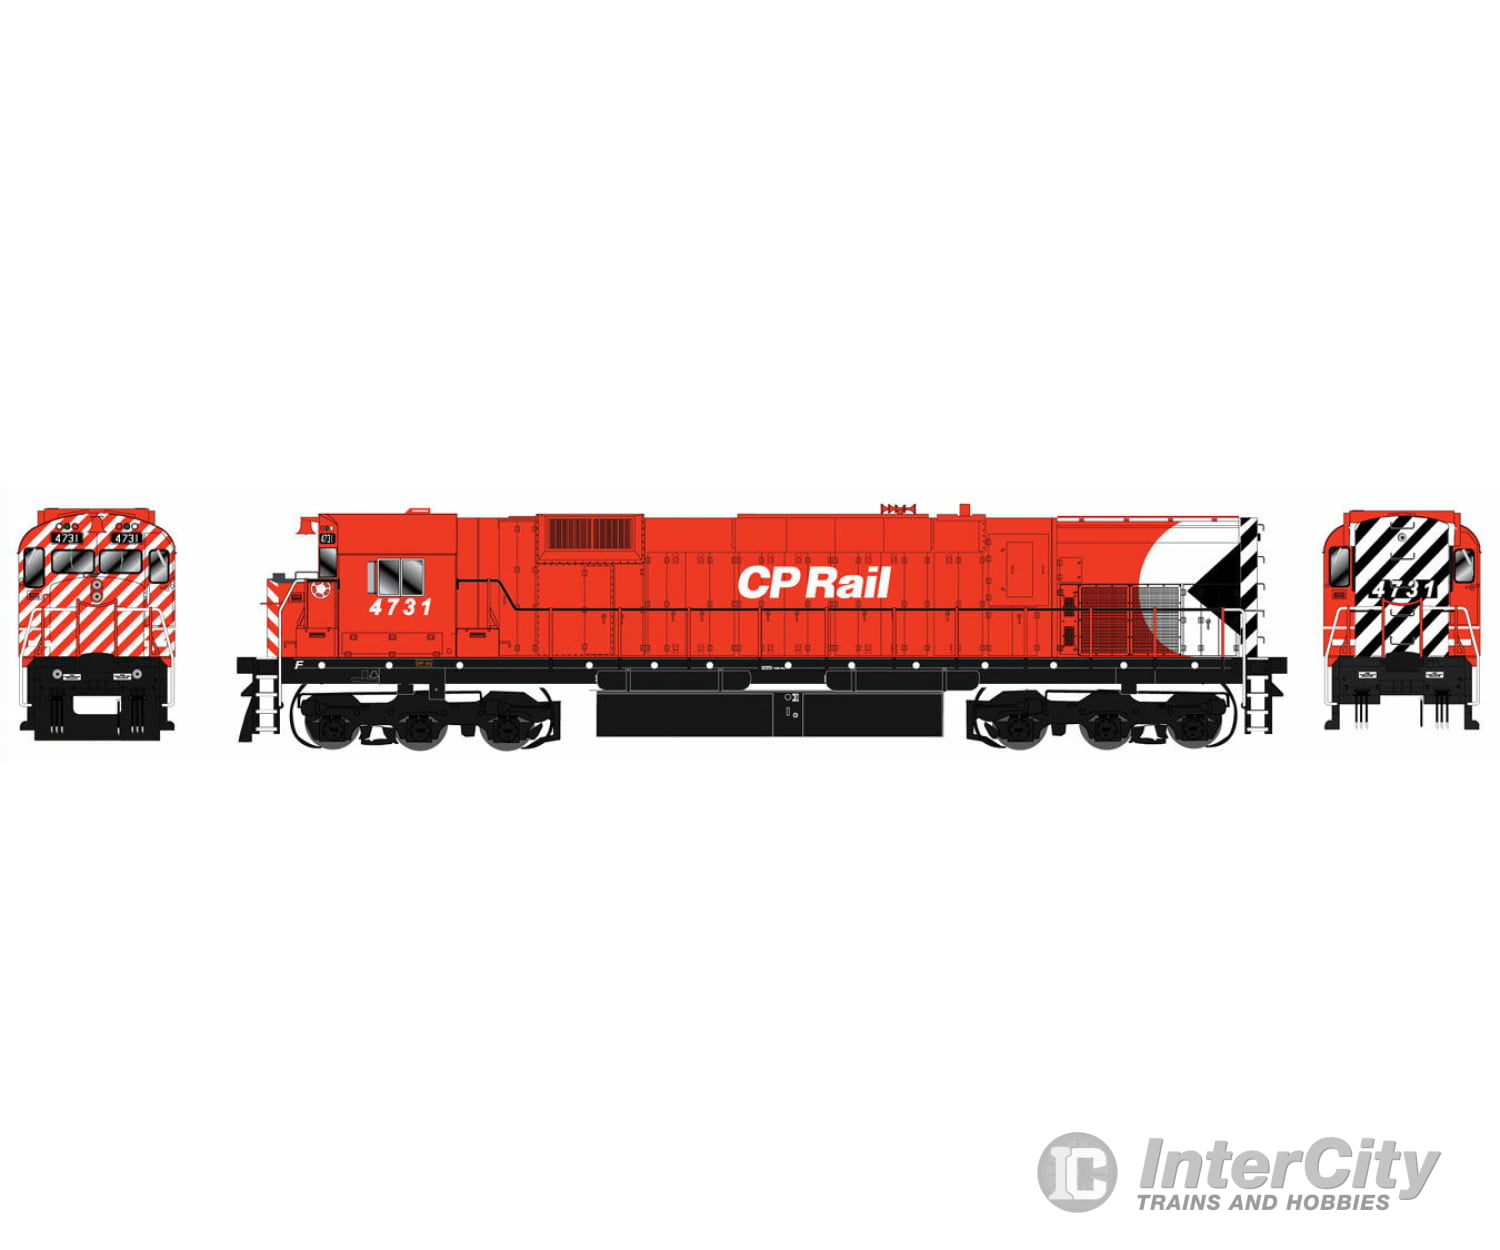 Bowser 24279 Ho Mlw M636 W/Loksound & Dcc - Executive Line -- Canadian Pacific #4734 (Action Red 5